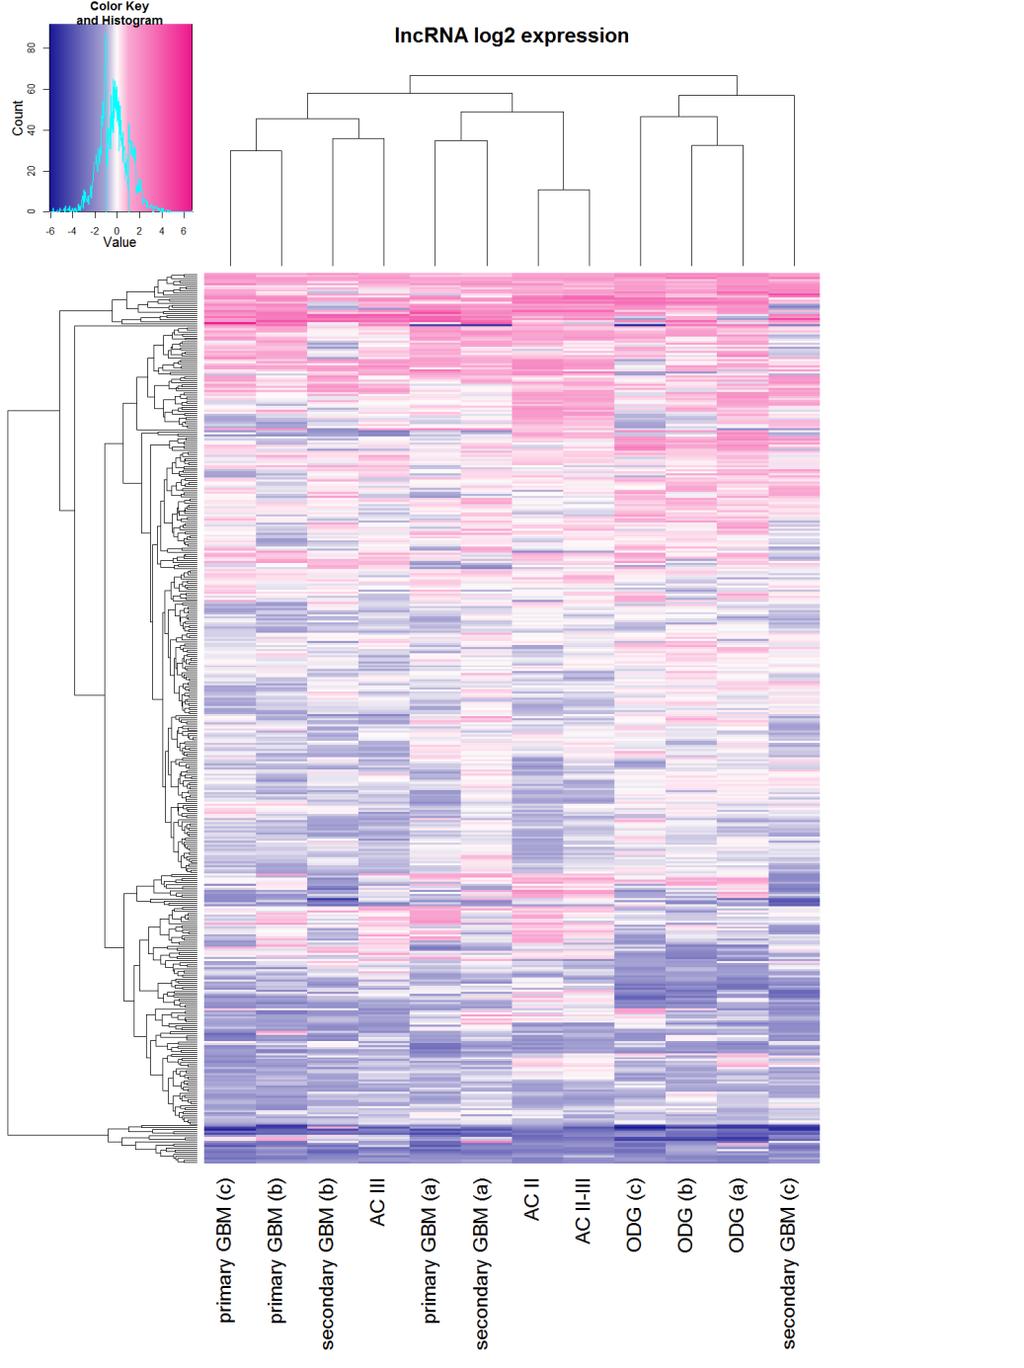 52 Figure 11. Heat map showing differential expression of lncrna genes in glioma tumours of different histological class relative to brain reference RNA.